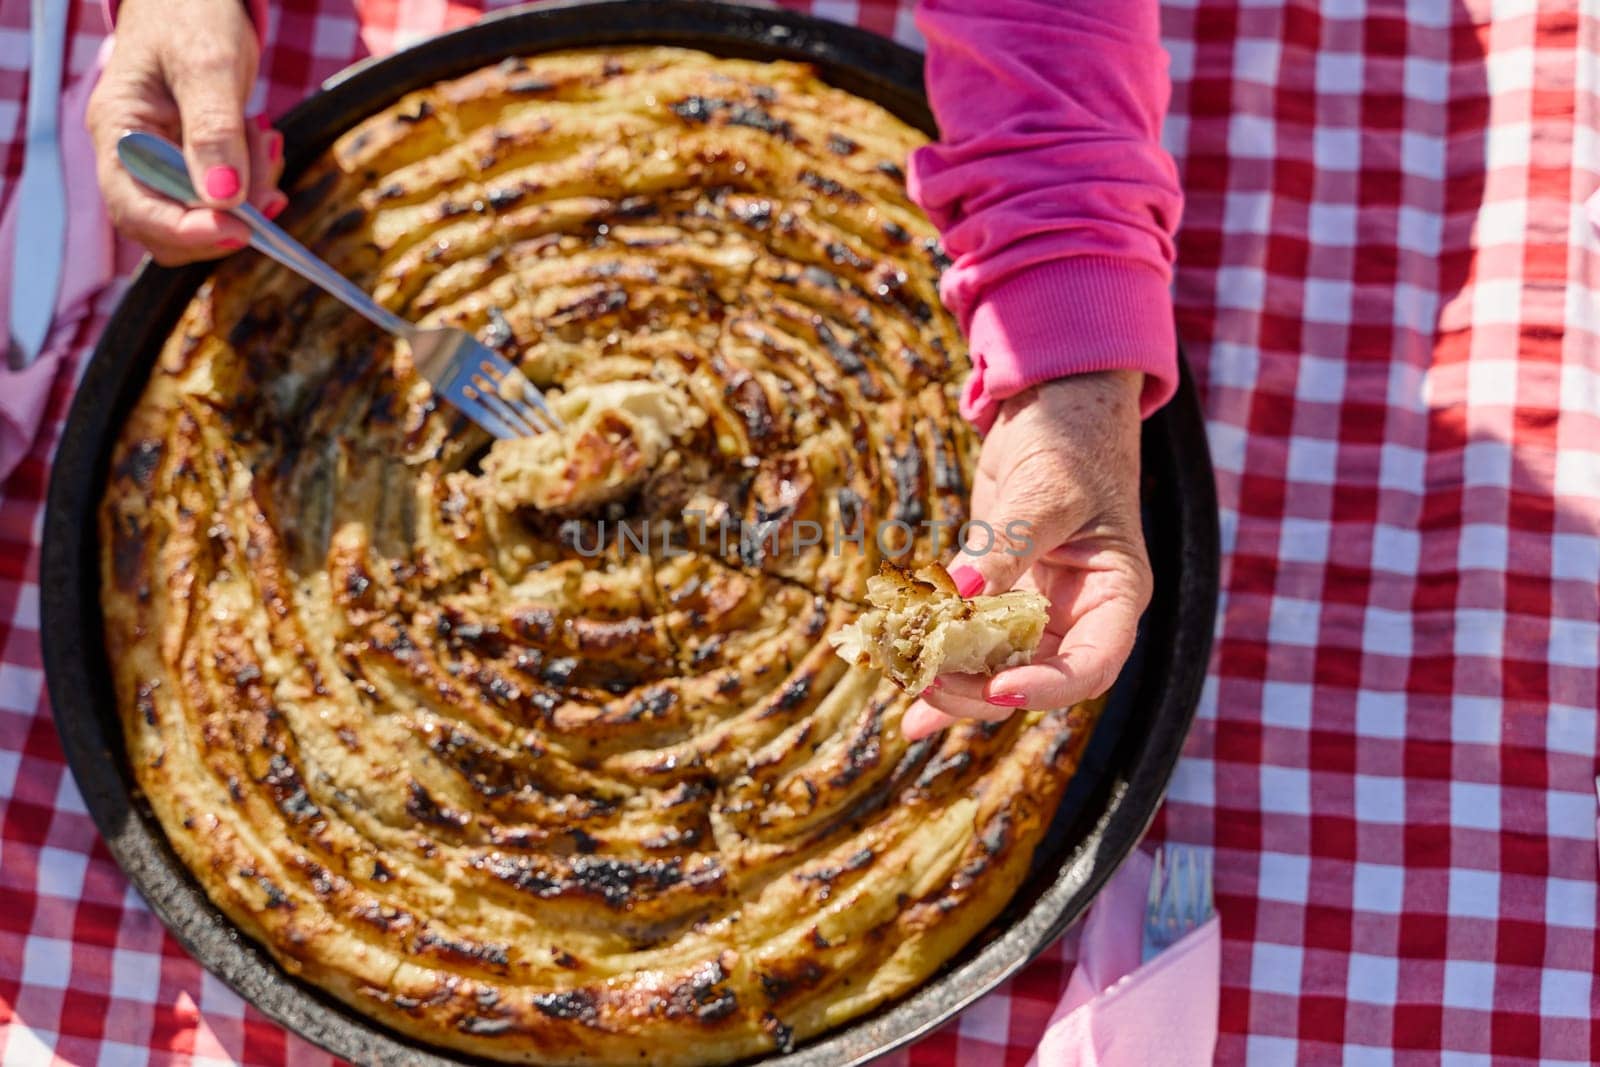 Exquisitely prepared, this traditional Bosnian dish showcases a mouthwatering pie under its lid, perfectly baked and ready to delight guests, embodying the rich culinary heritage and inviting flavors of Bosnian cuisine by dotshock